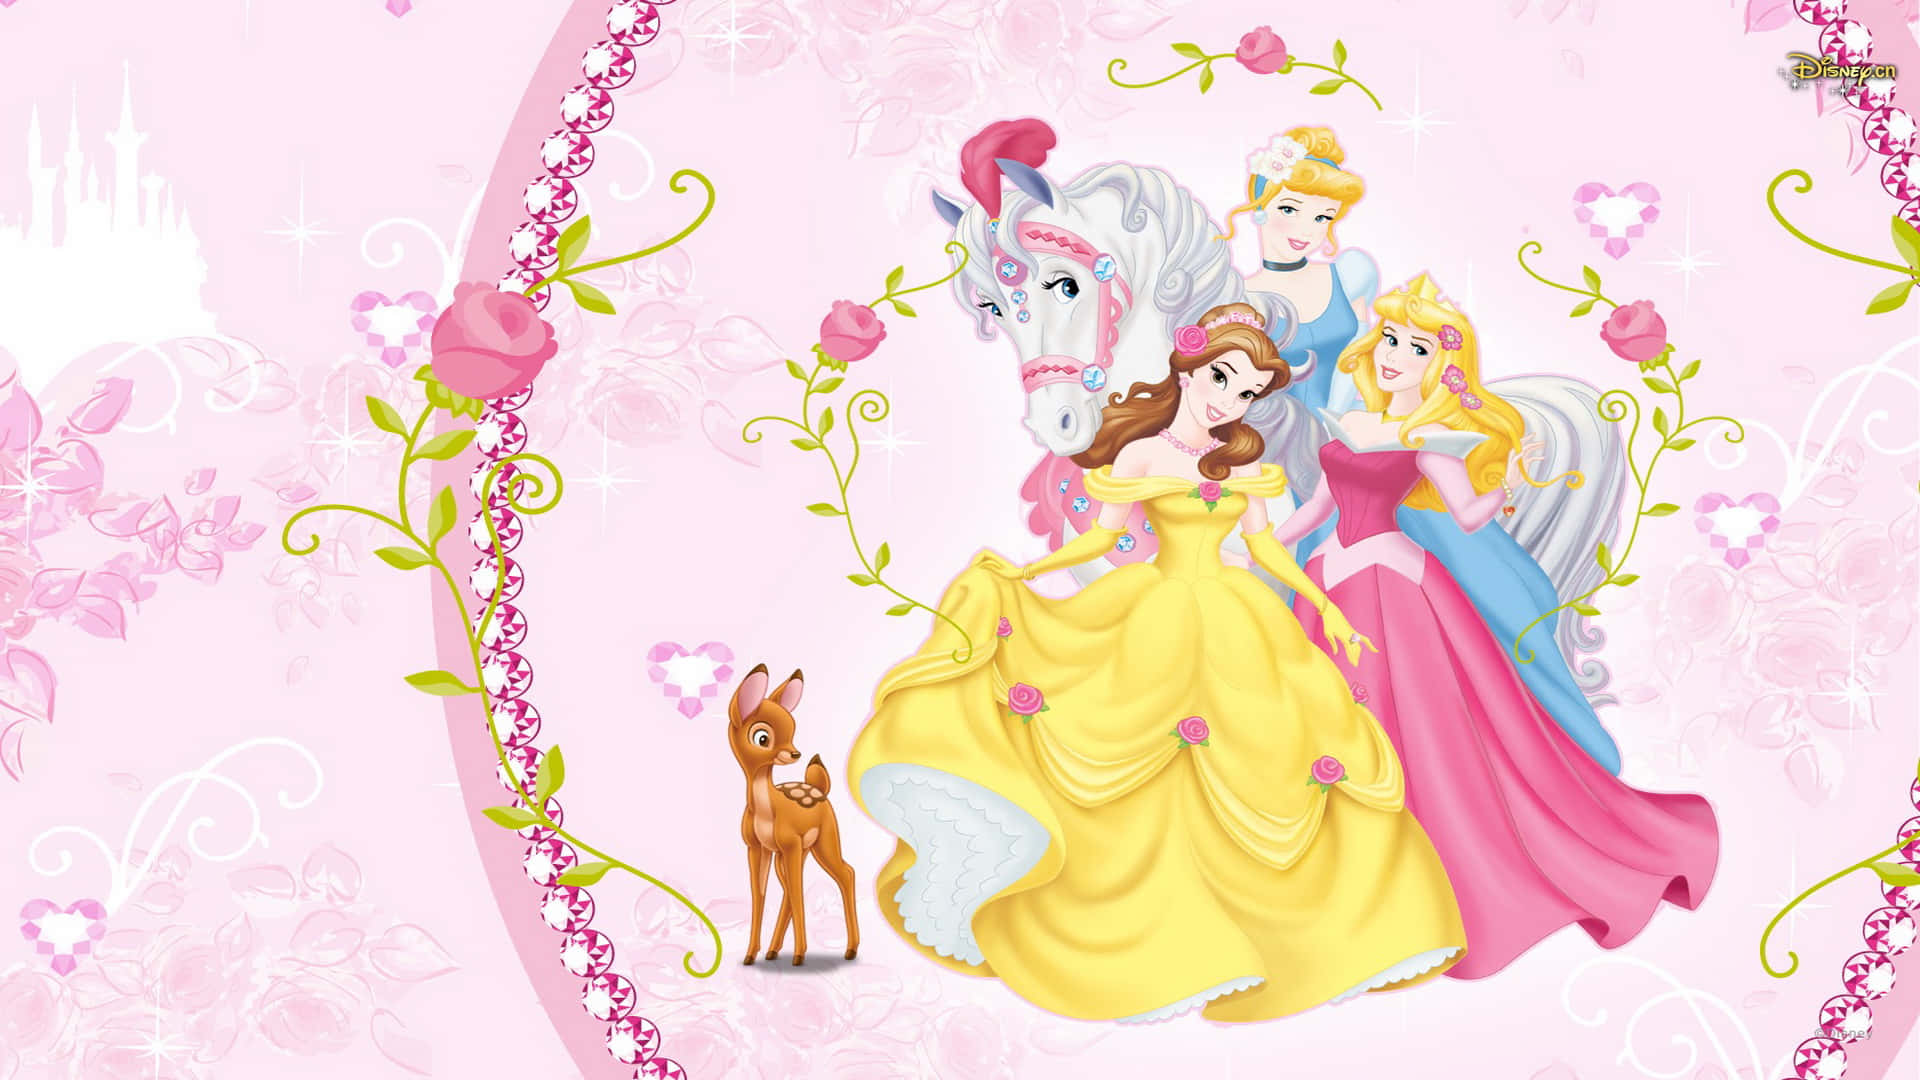 Princesses And A Deer On A Pink Background